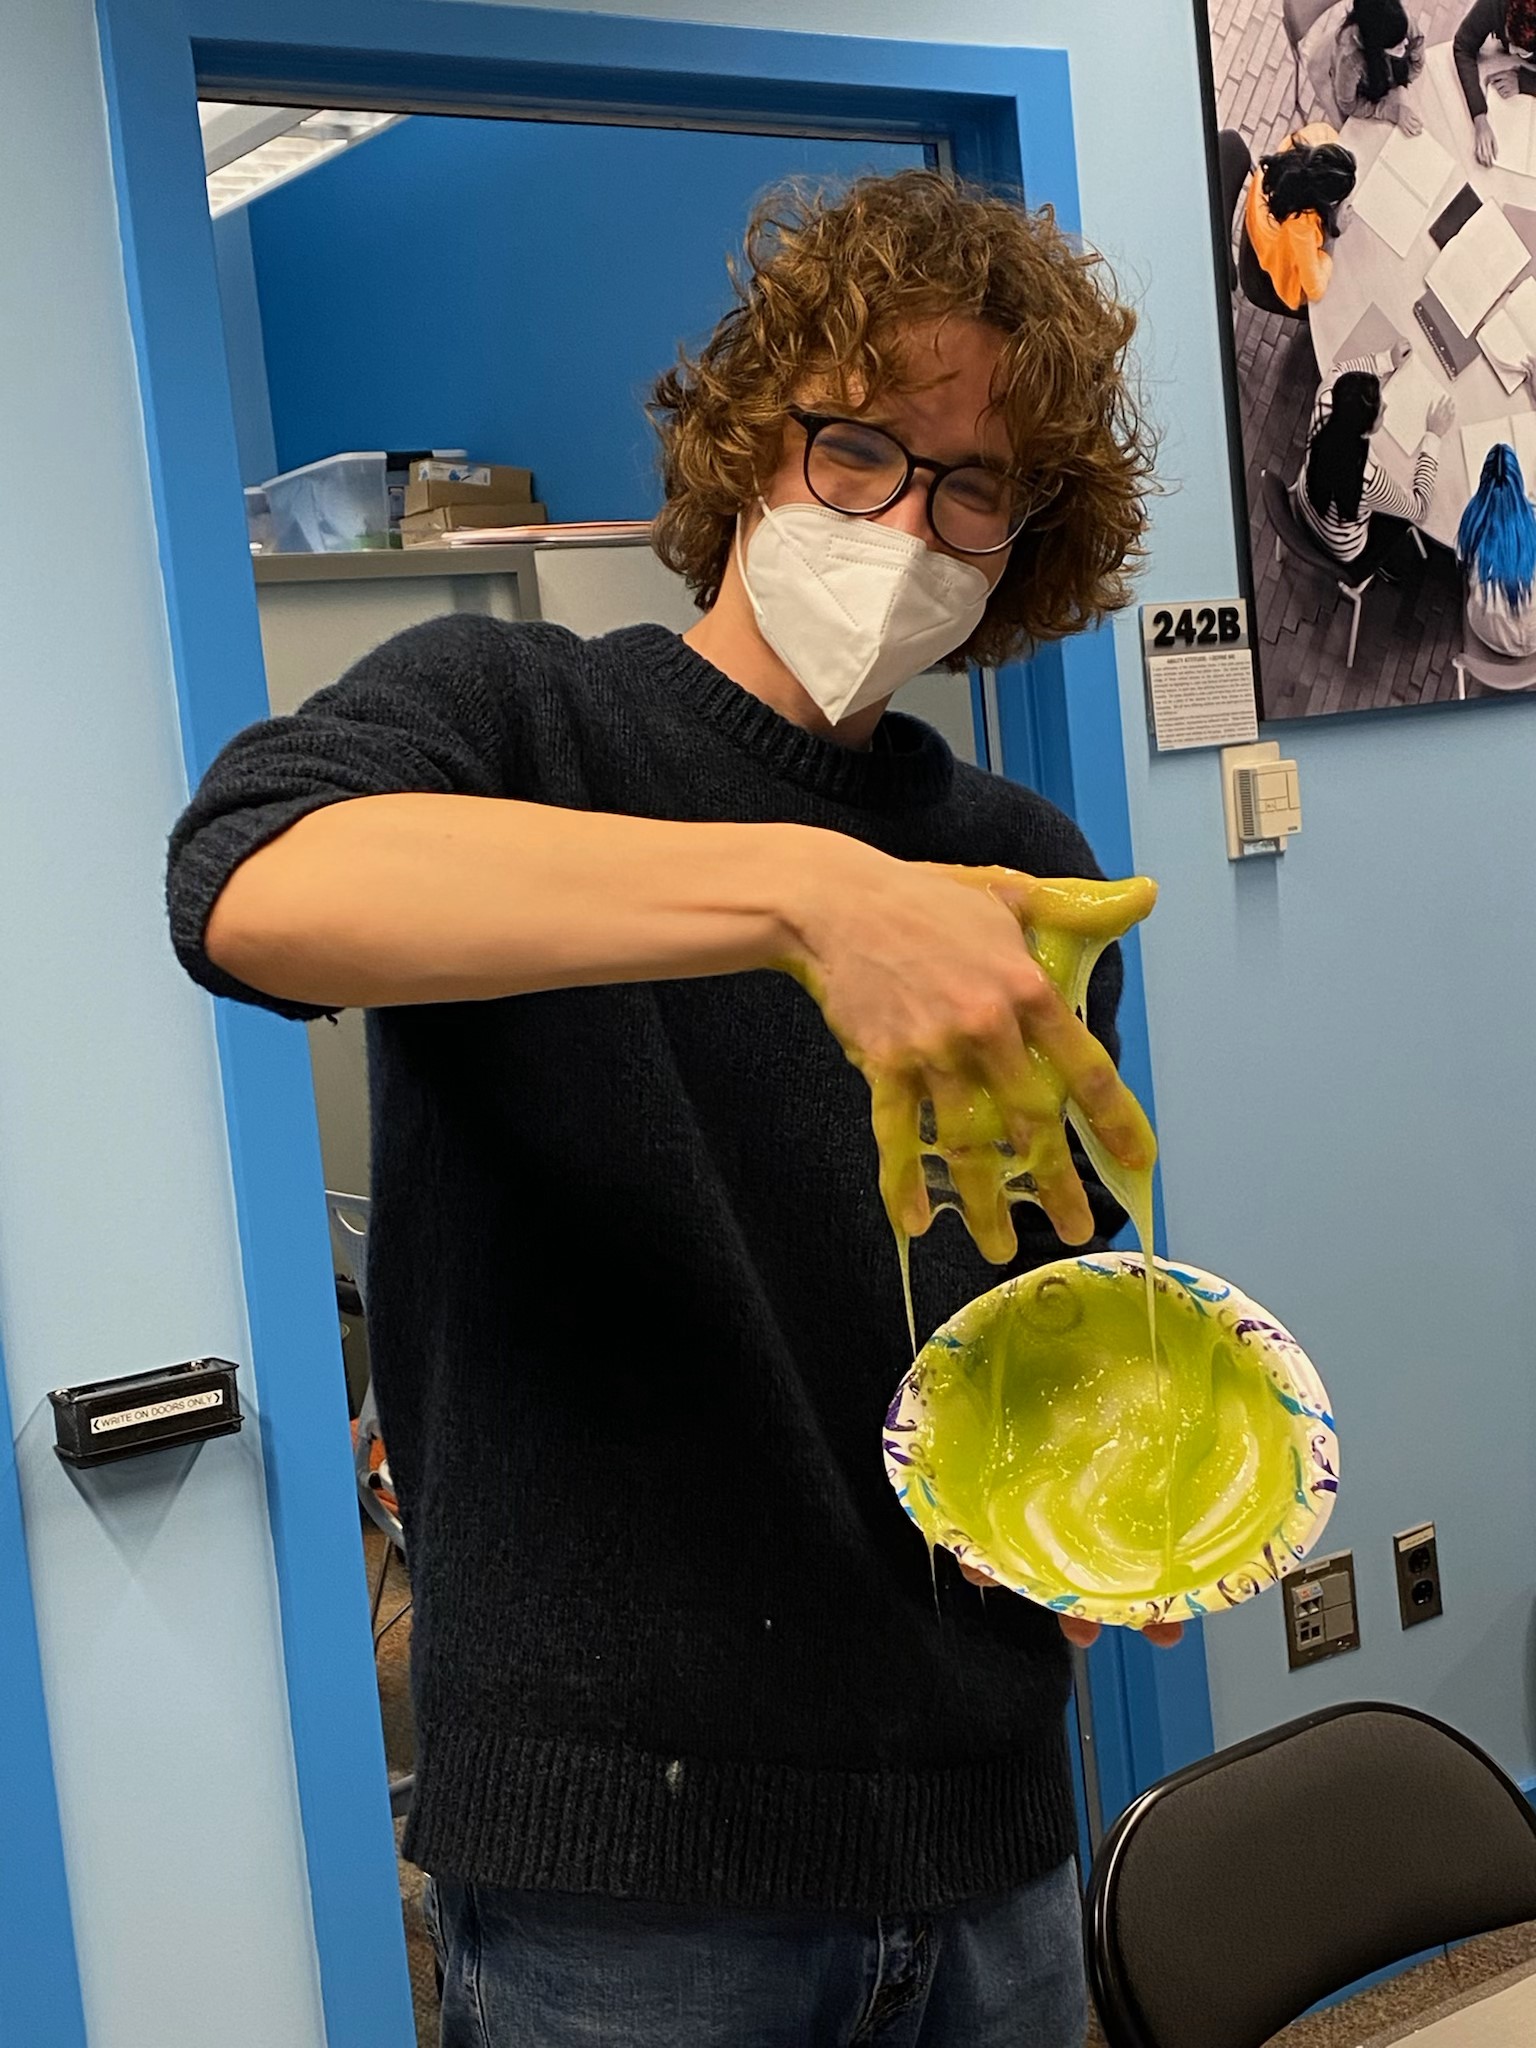 Harper poses with his hand in a bowl of slime